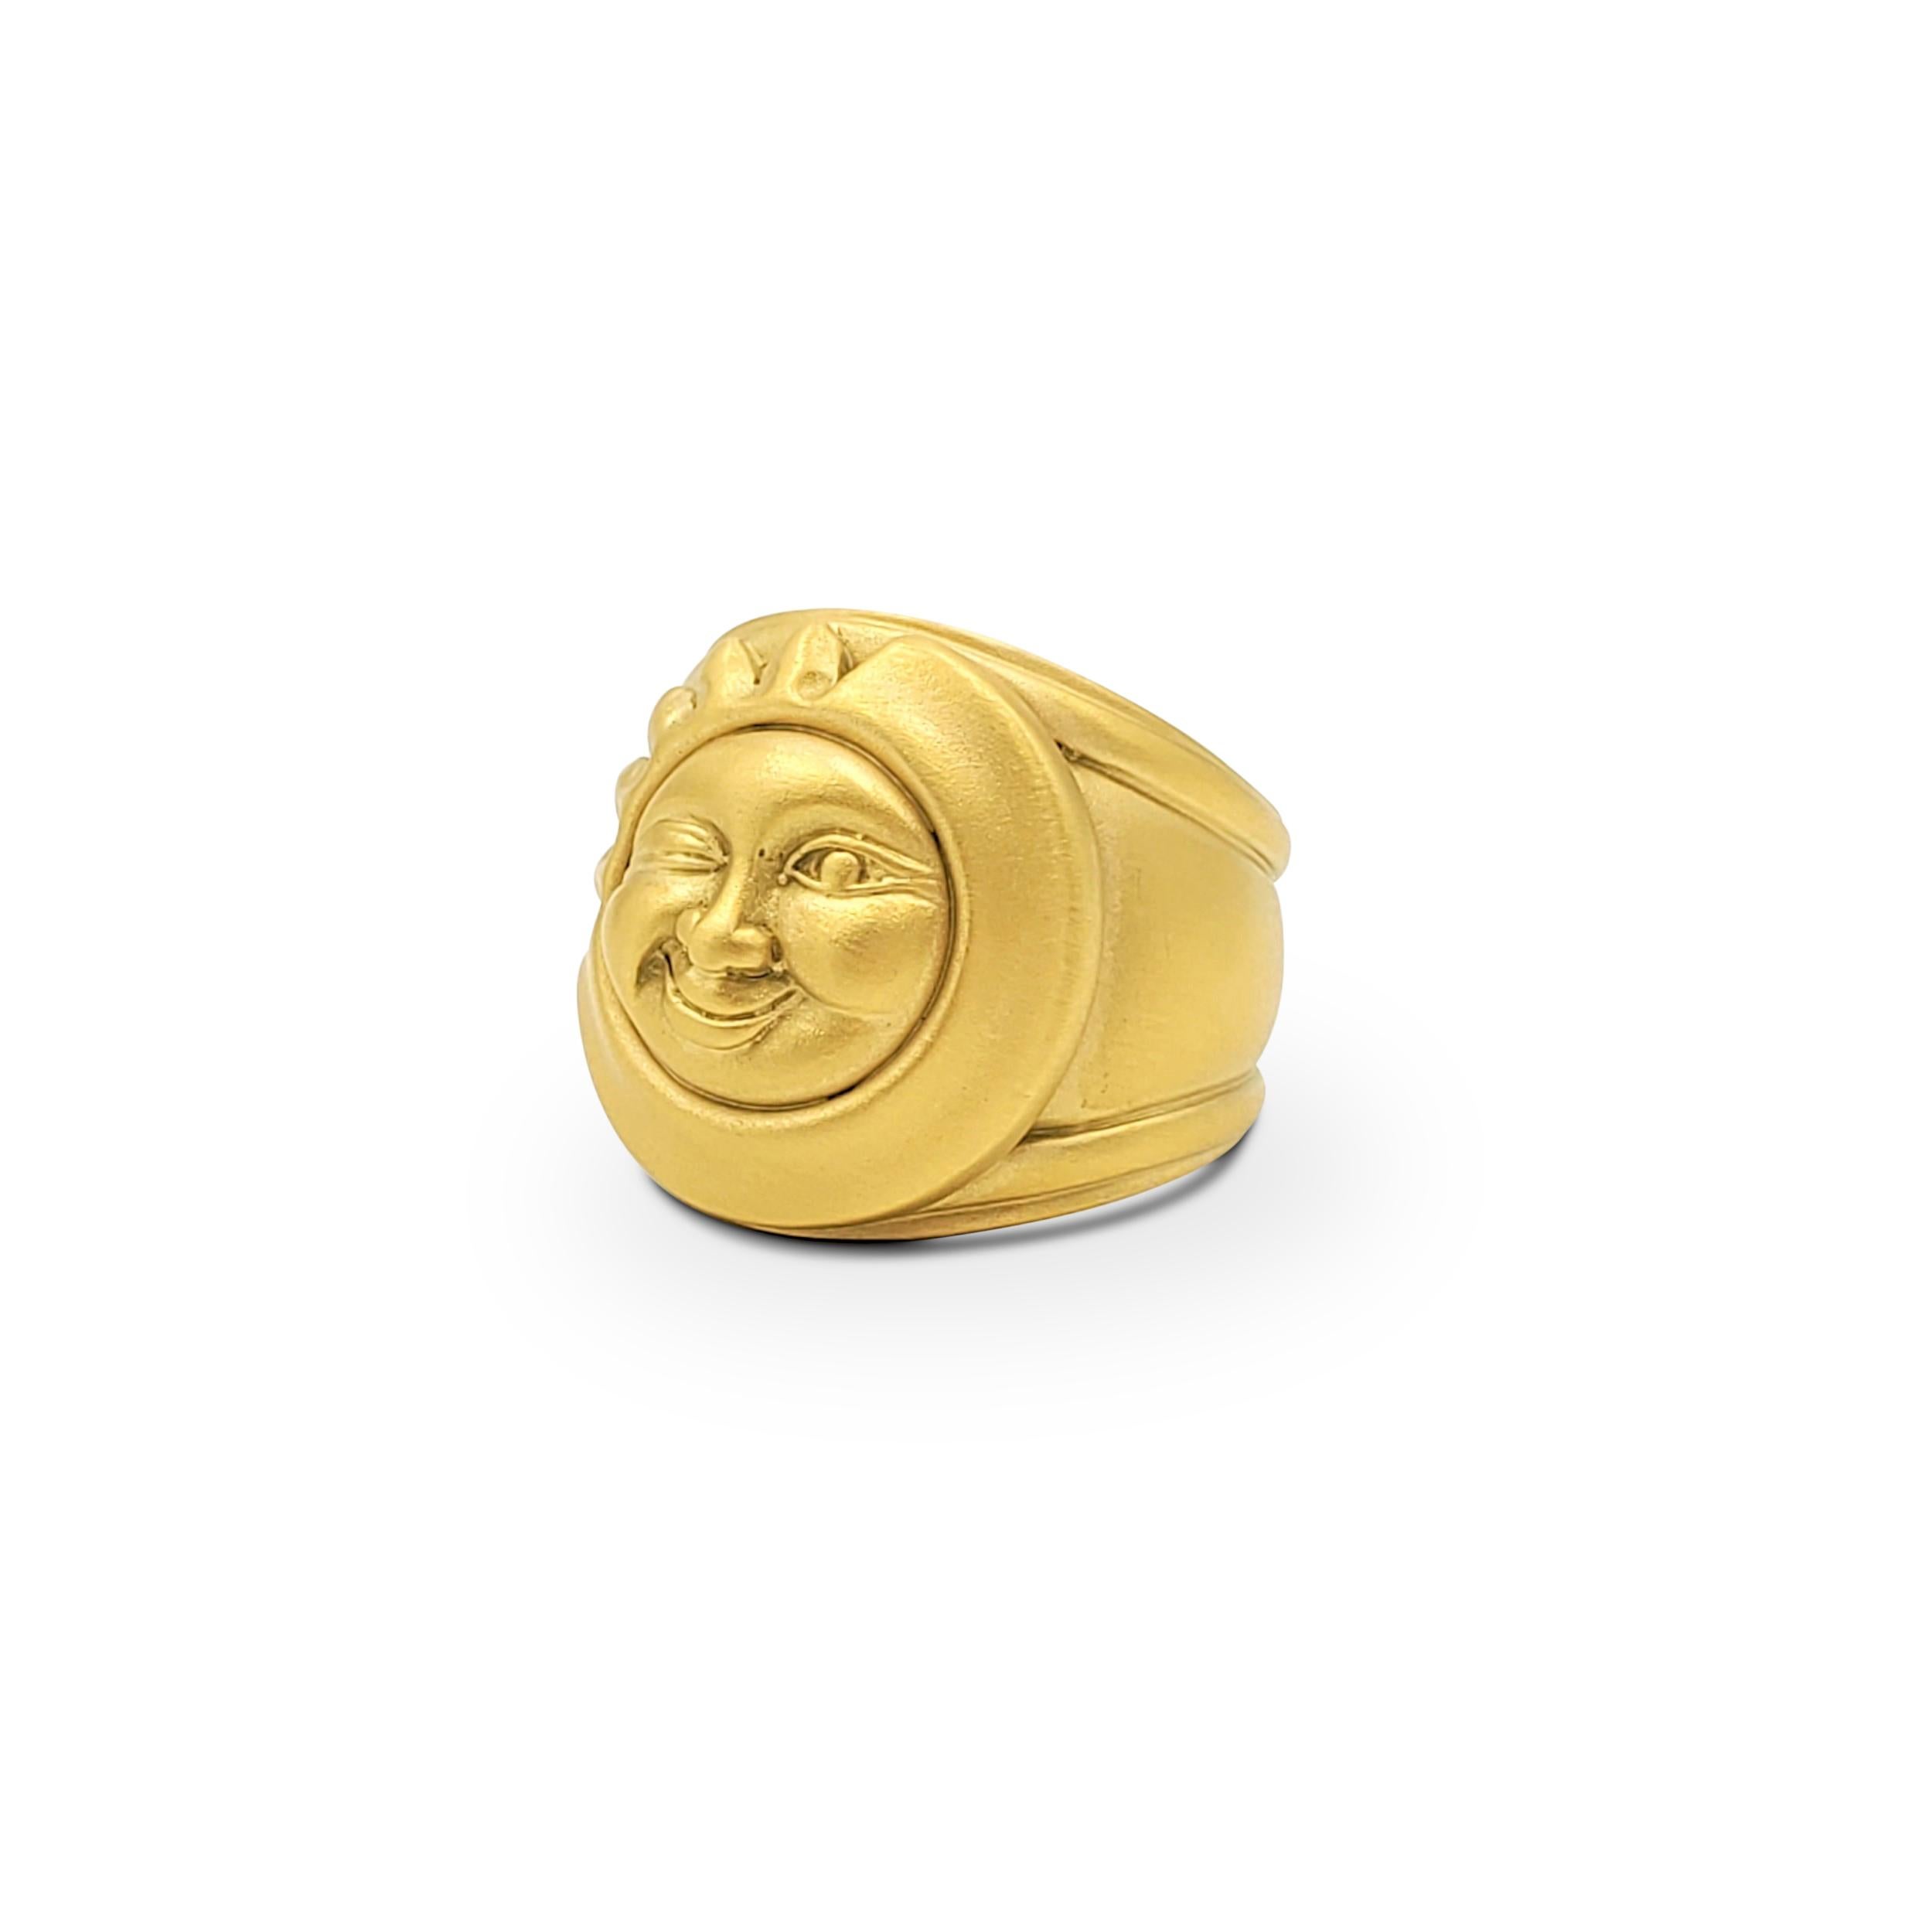 Authentic Barry Kieselstein-Cord ring crafted in satin finish 18 karat yellow gold features a charming winking sun/moon design. Signed B. Kieselstein Cord, 18K, 1990, with hallmarks. Ring size 5 1/2. The ring is not presented with the original box